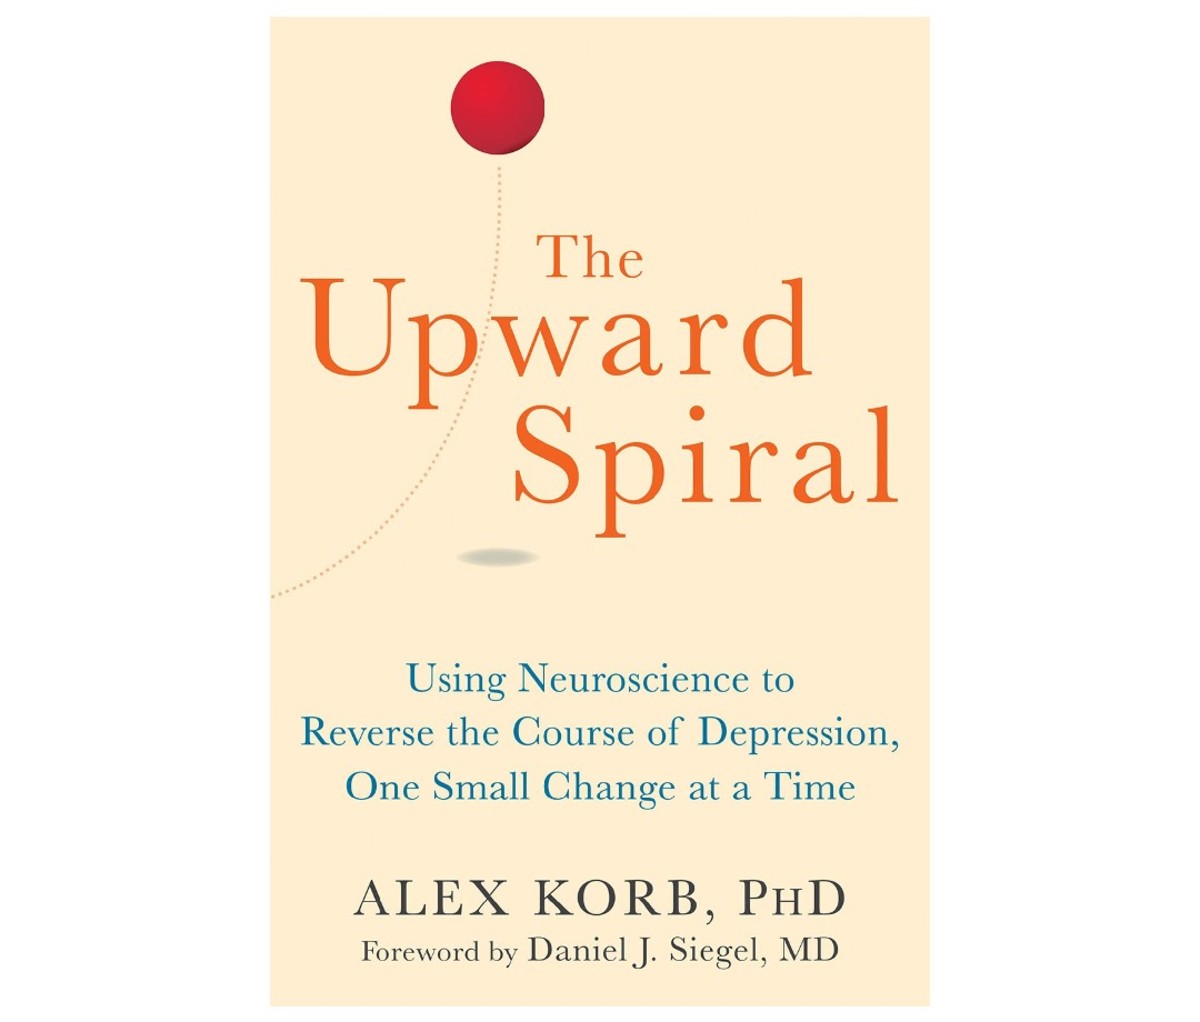 Upward Spiral: Using Neuroscience to Reverse the Course of Depression, One Small Change at a Time by Alex Korb